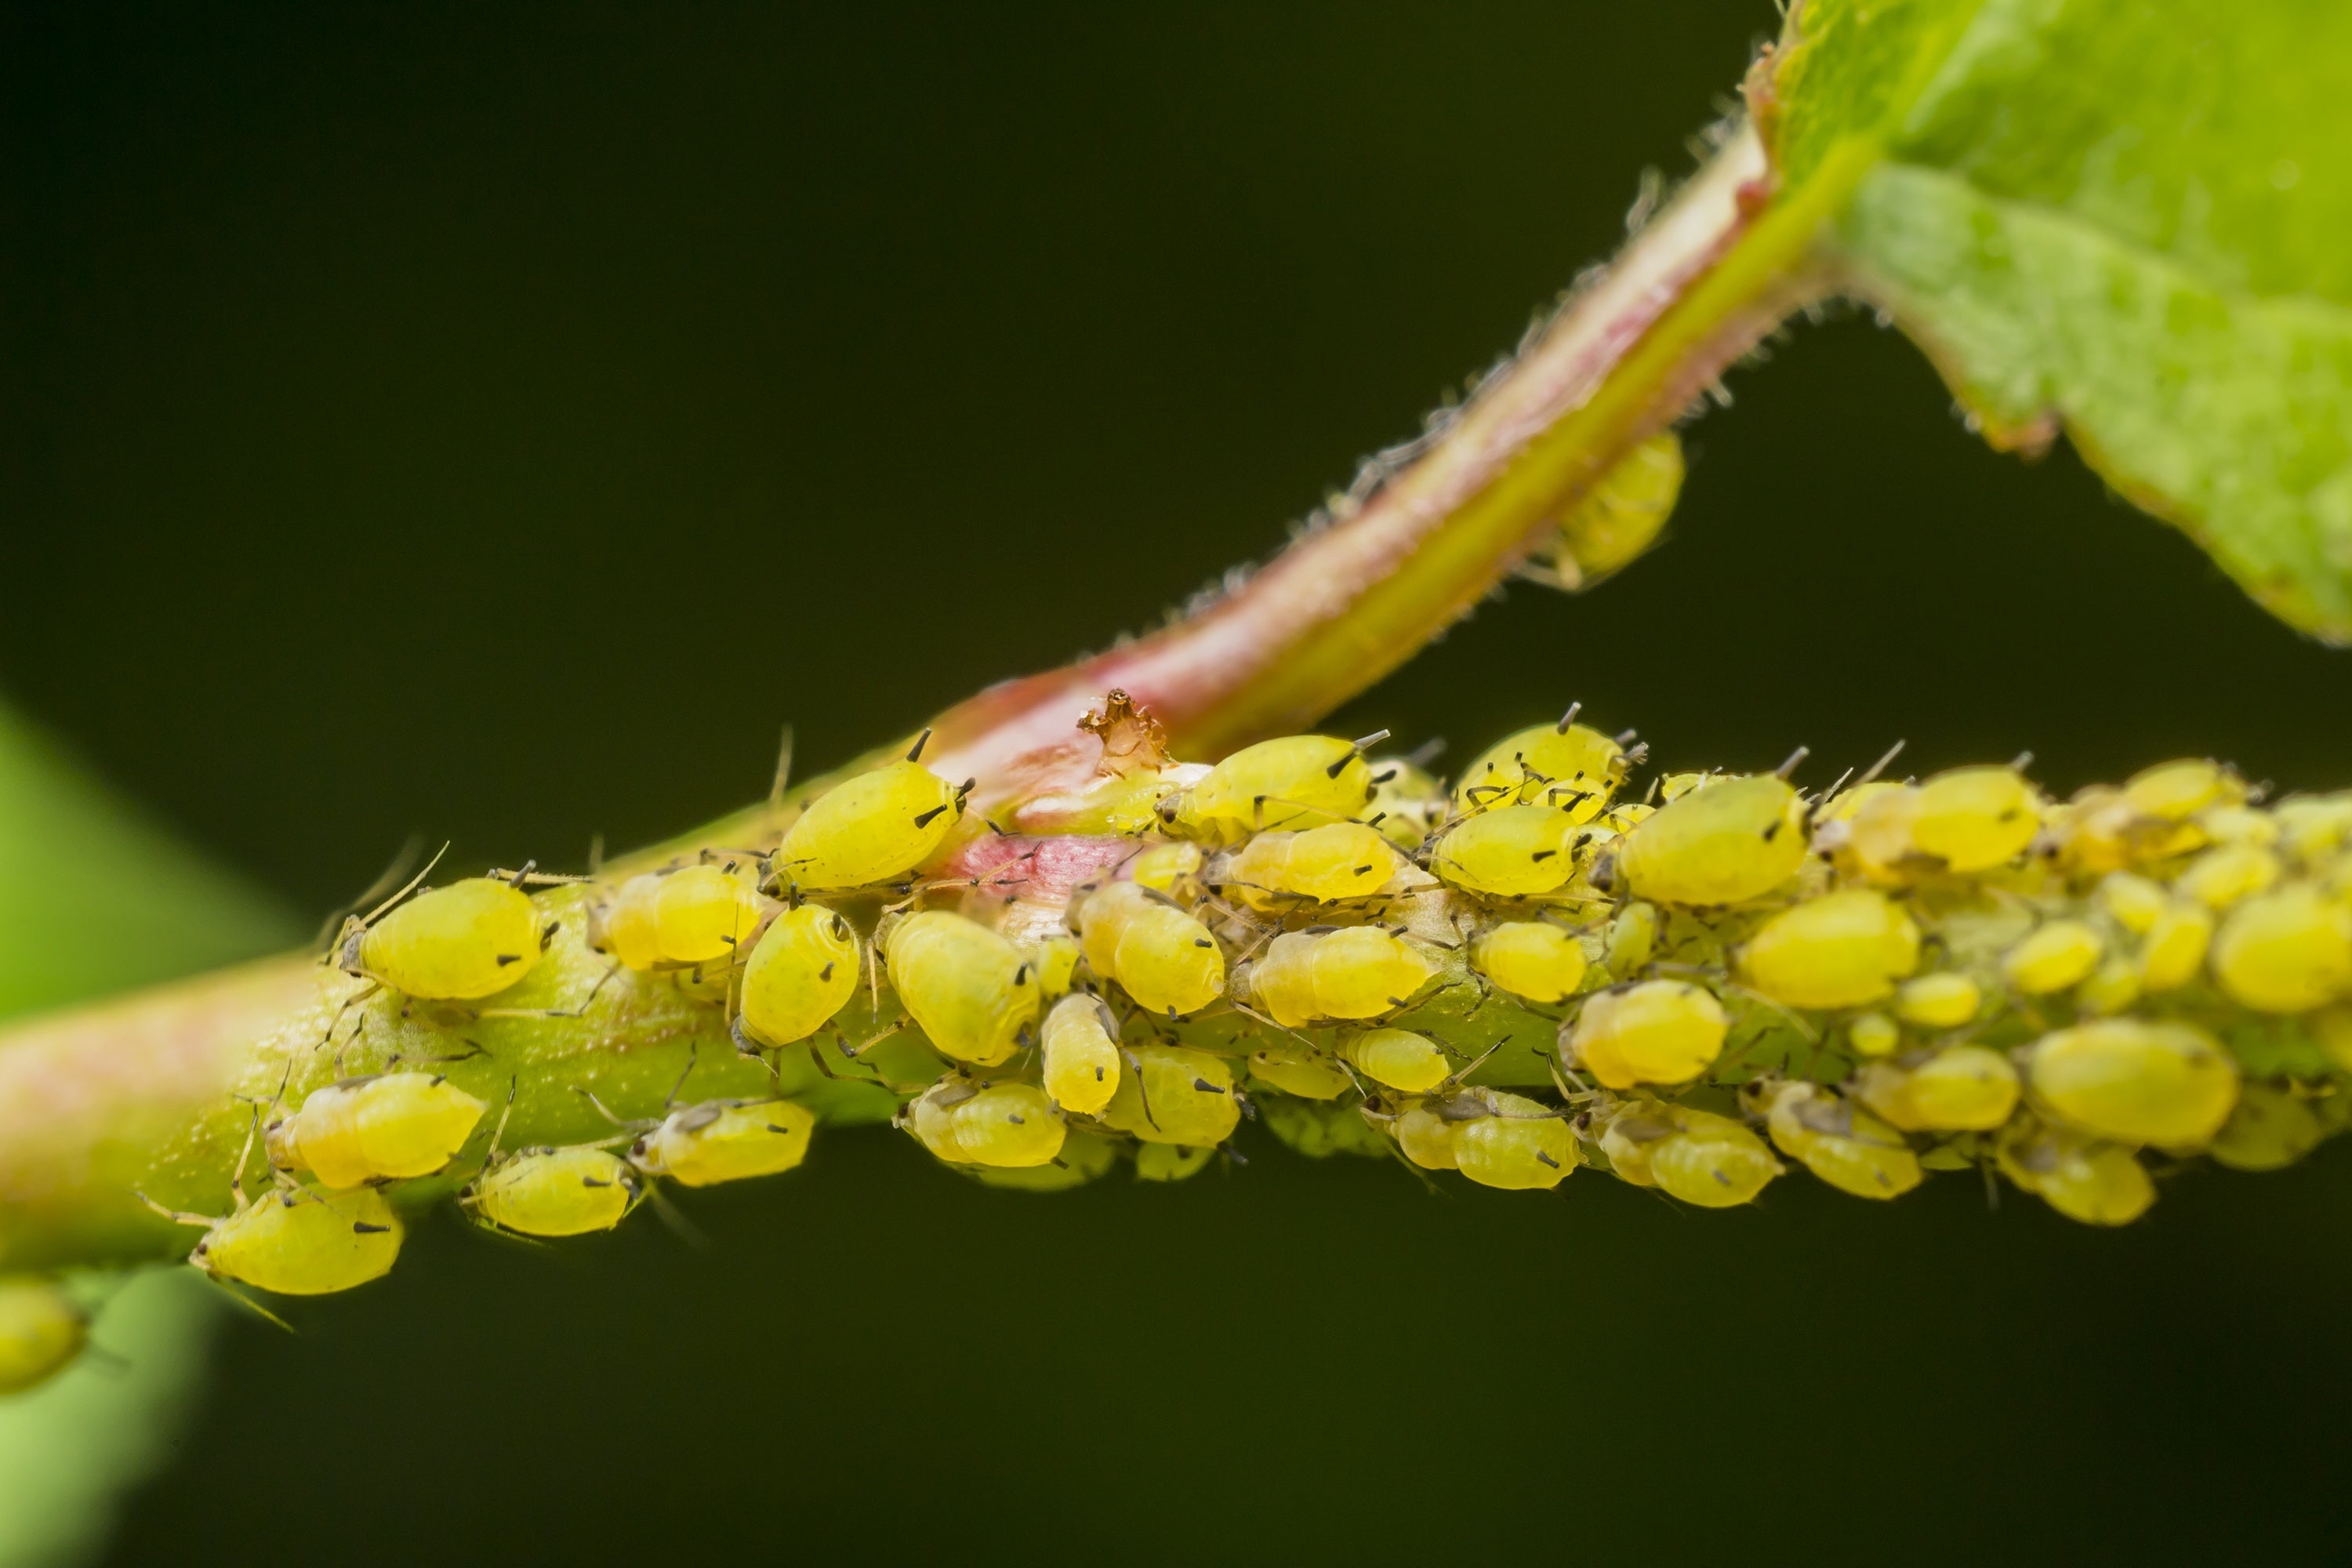 Aphids on Plants